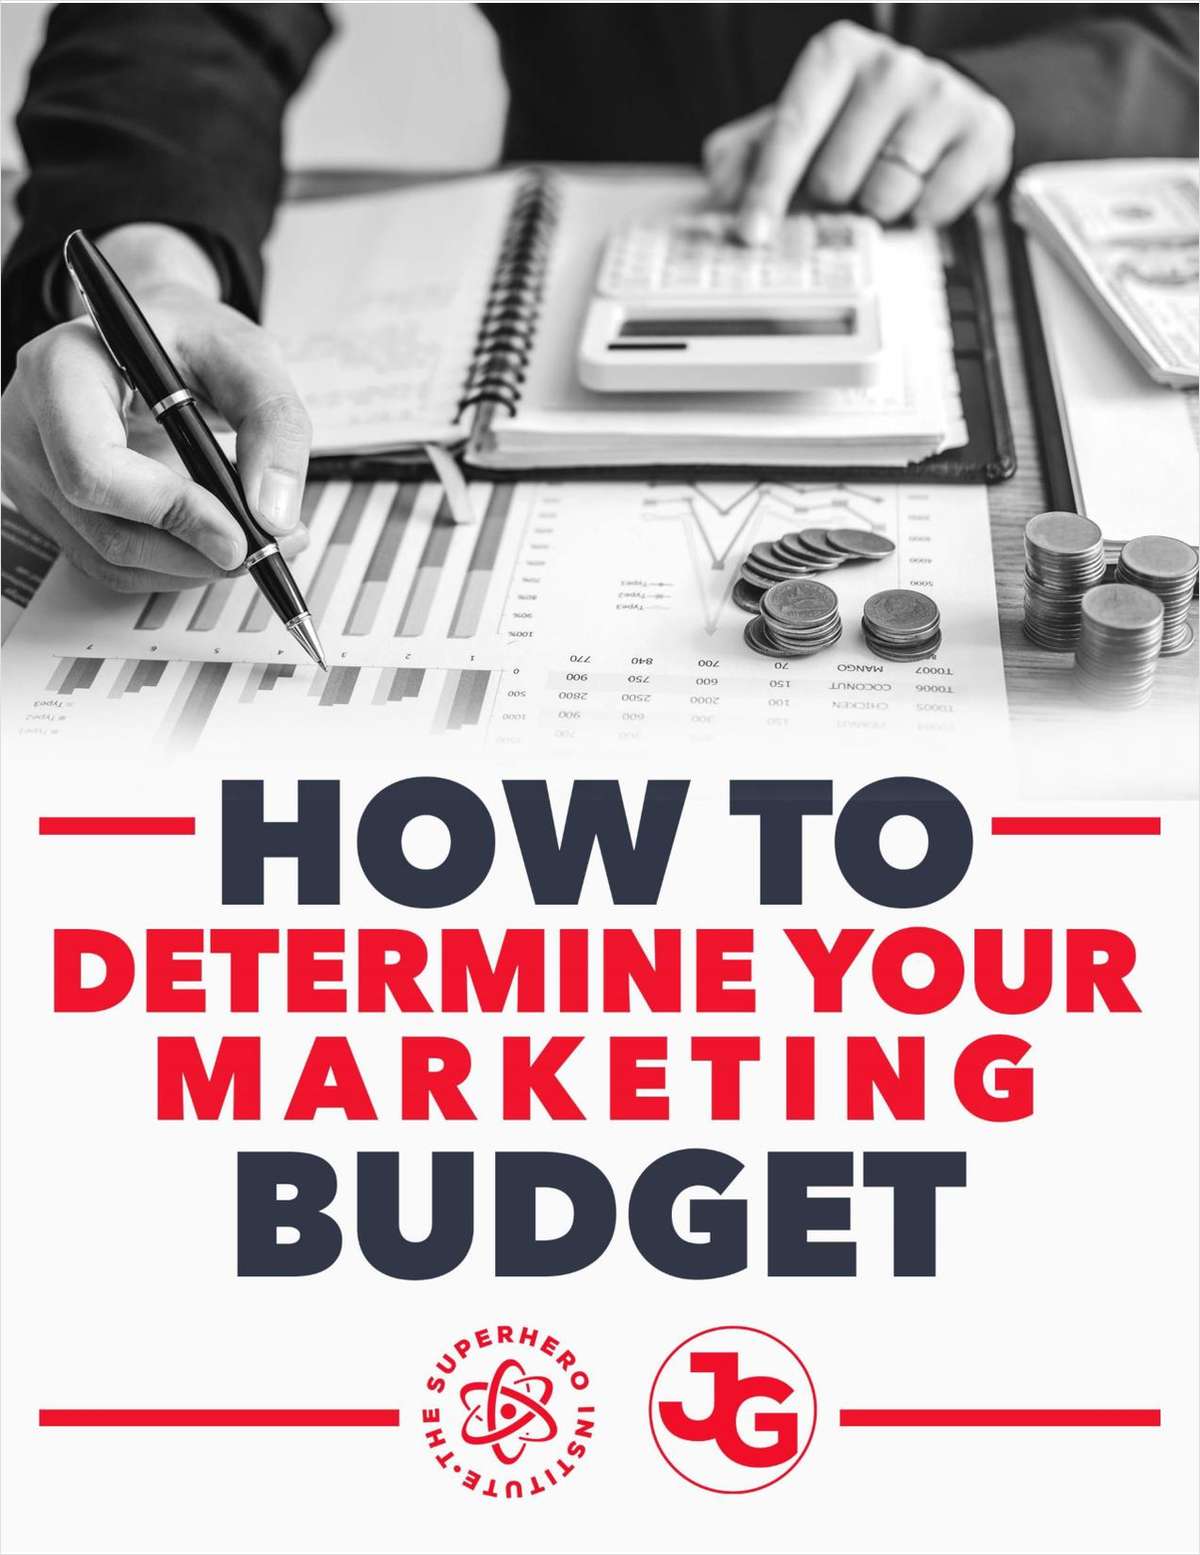 How to Determine your Marketing Budget